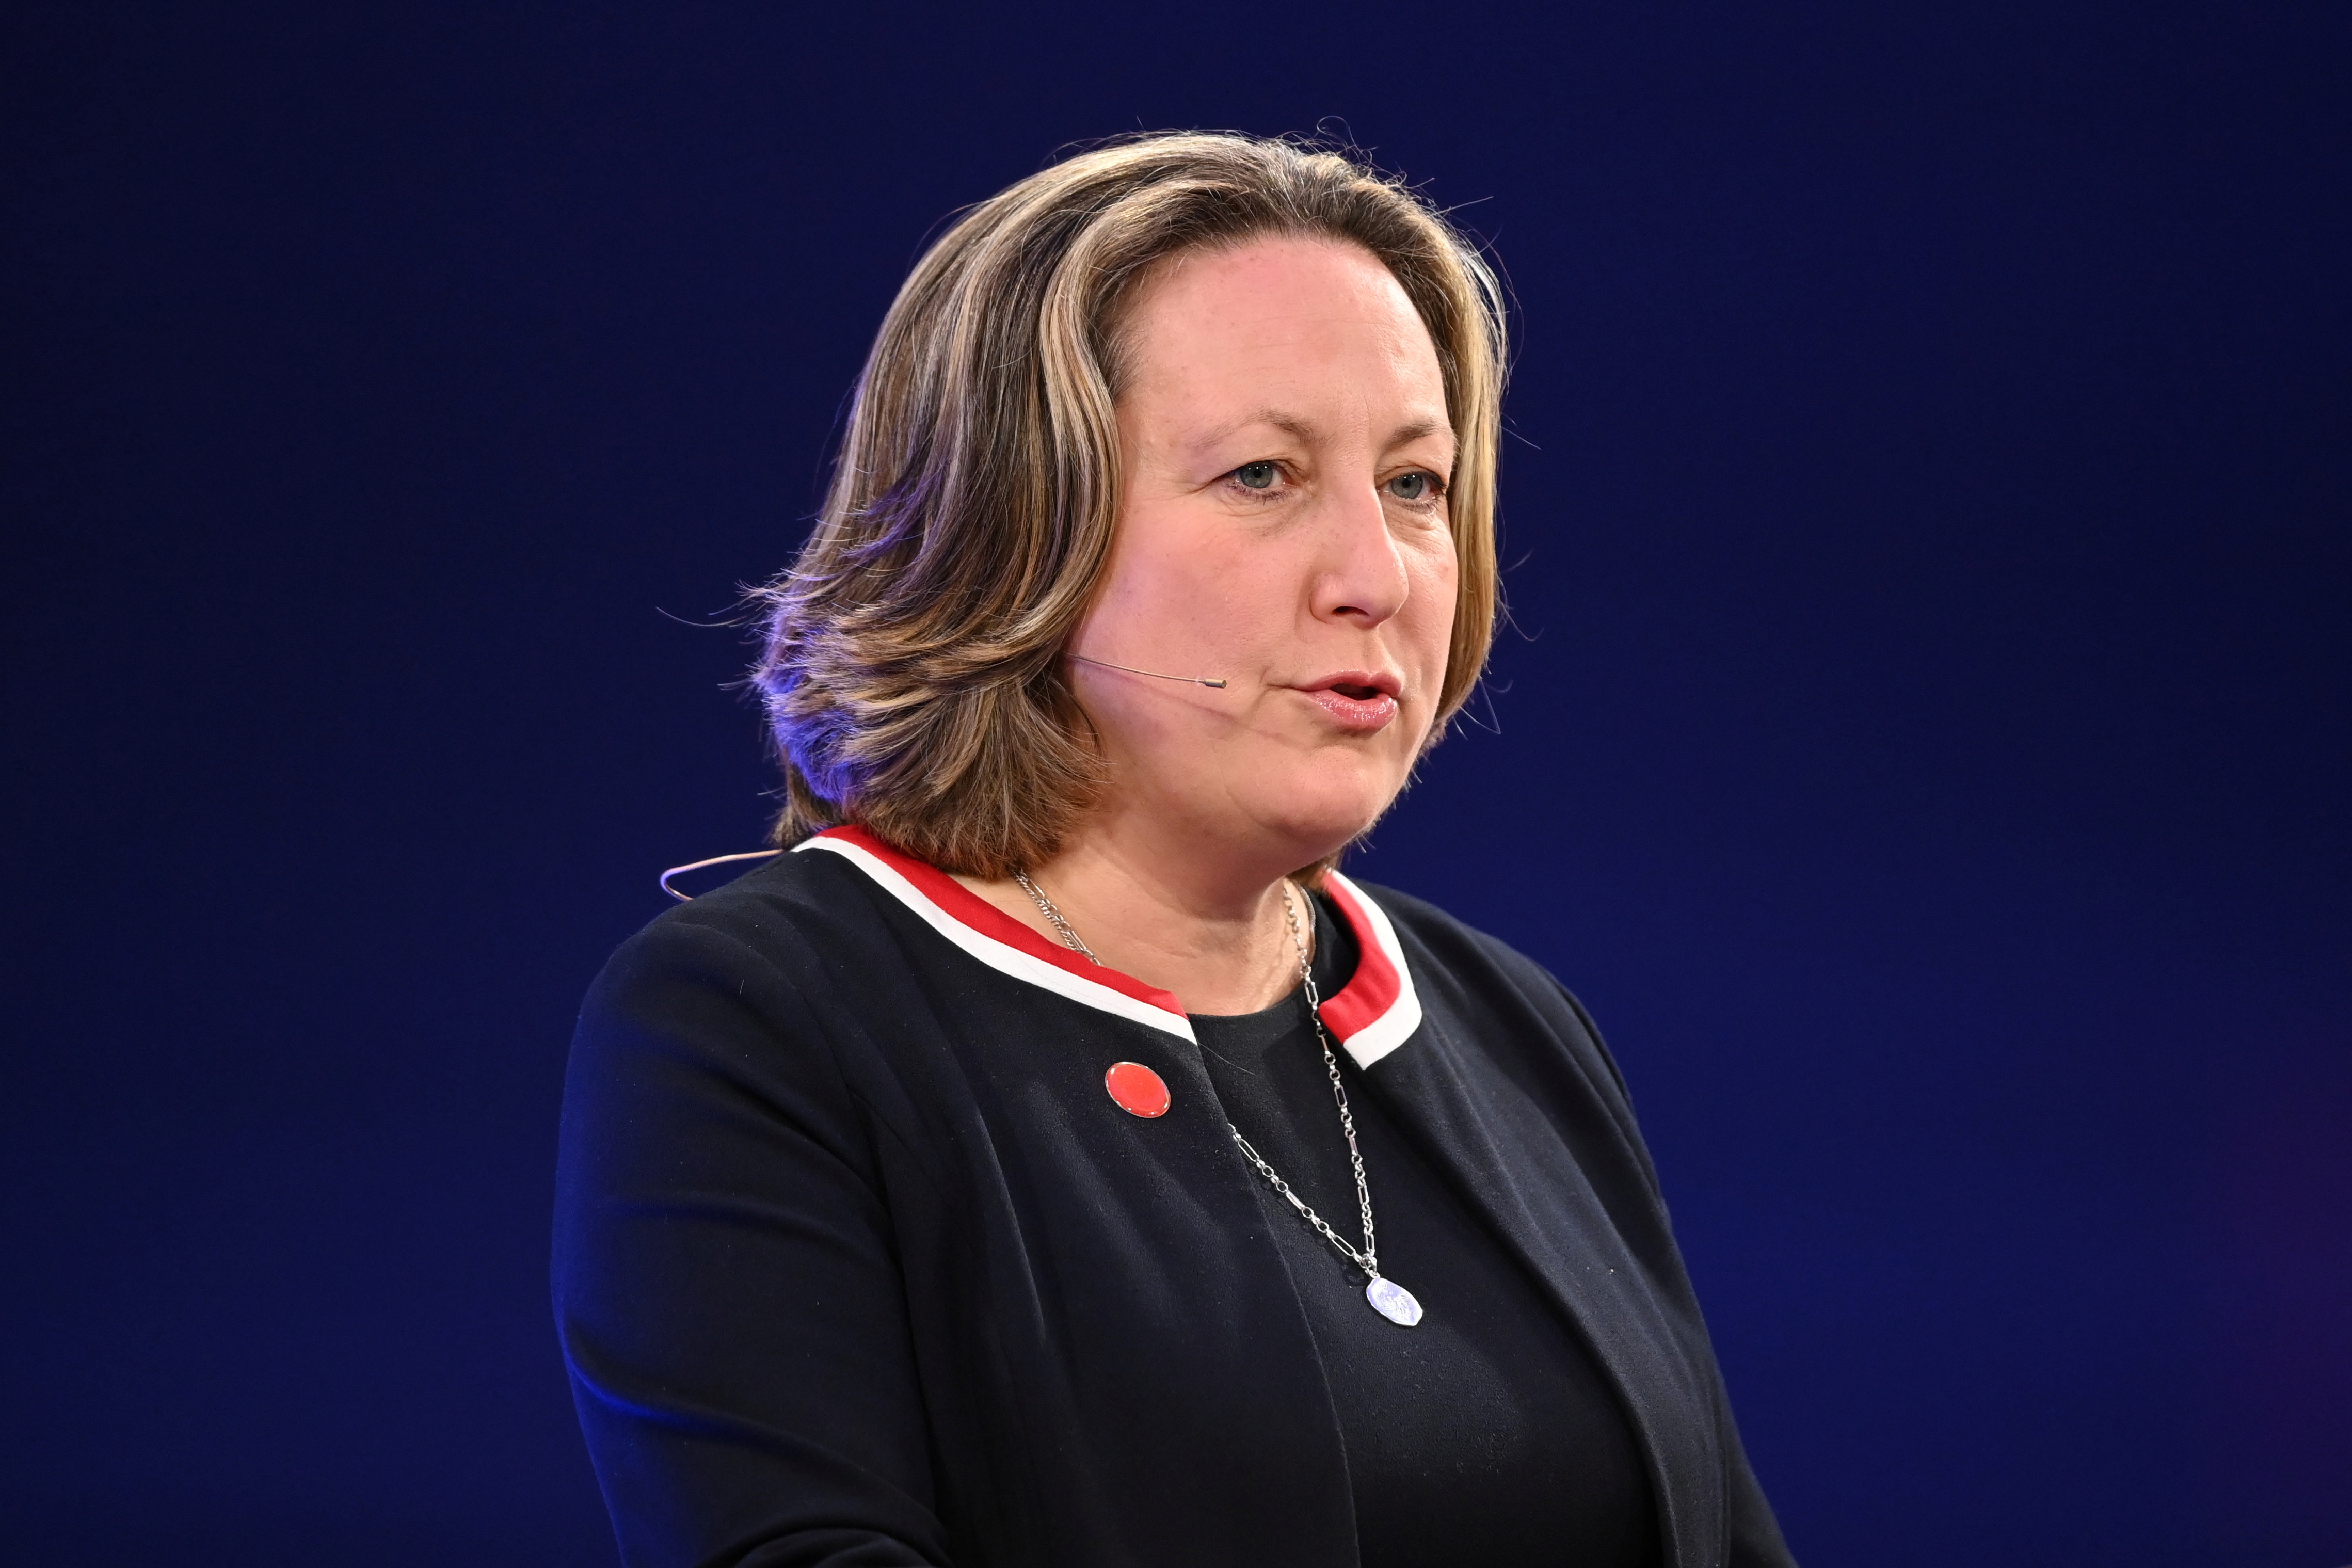 Britain's International Trade Secretary Anne-Marie Trevelyan speaks during the Global Investment Summit at the Science Museum, in London, Britain, October 19, 2021. Leon Neal/Pool via REUTERS